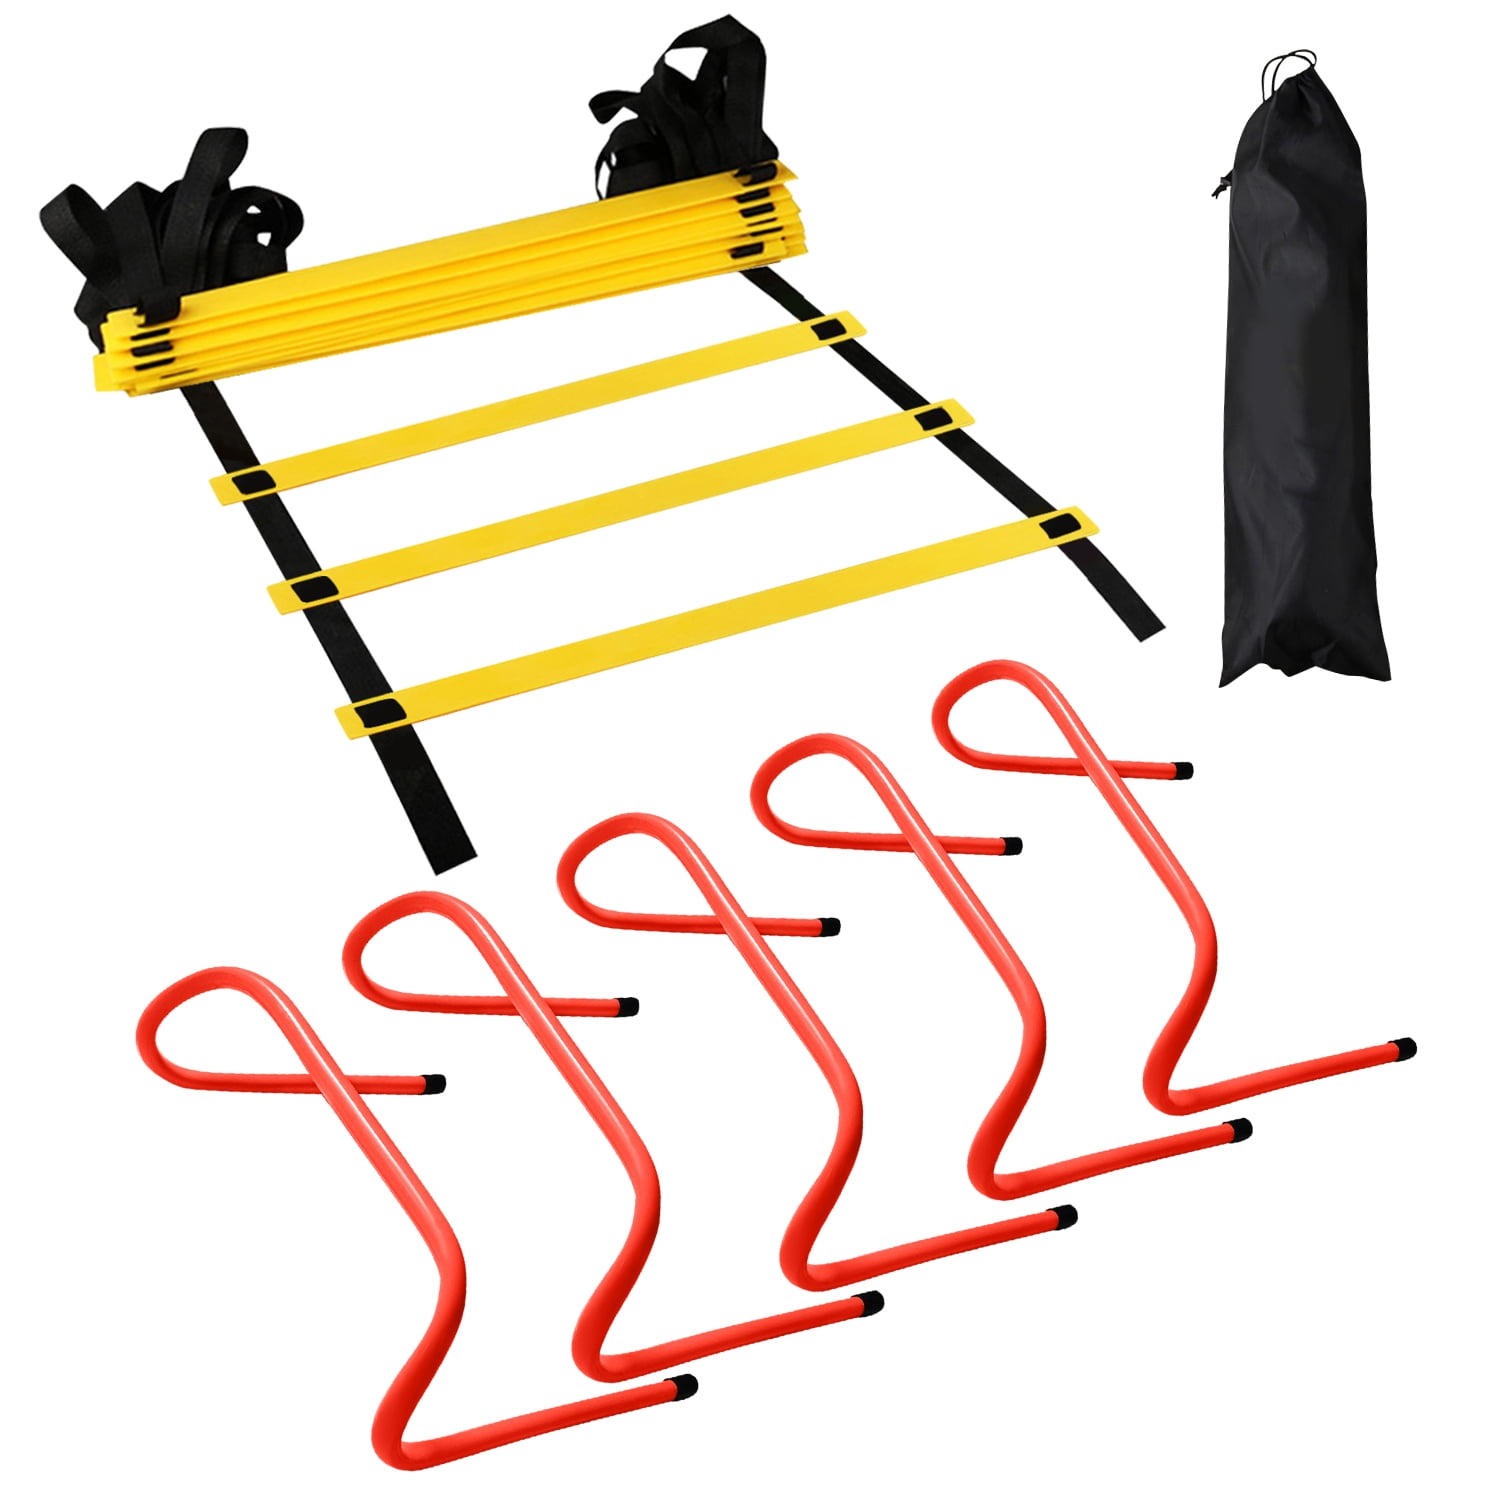 FASHAYAY Agility Ladder Training Set 12Rung 20ft Speed Ladder Football Training Equipment Kit with 10 Cones and 4 Stakes Workout Exercise Sports Soccer Running Training Tools for Kids and Adults 